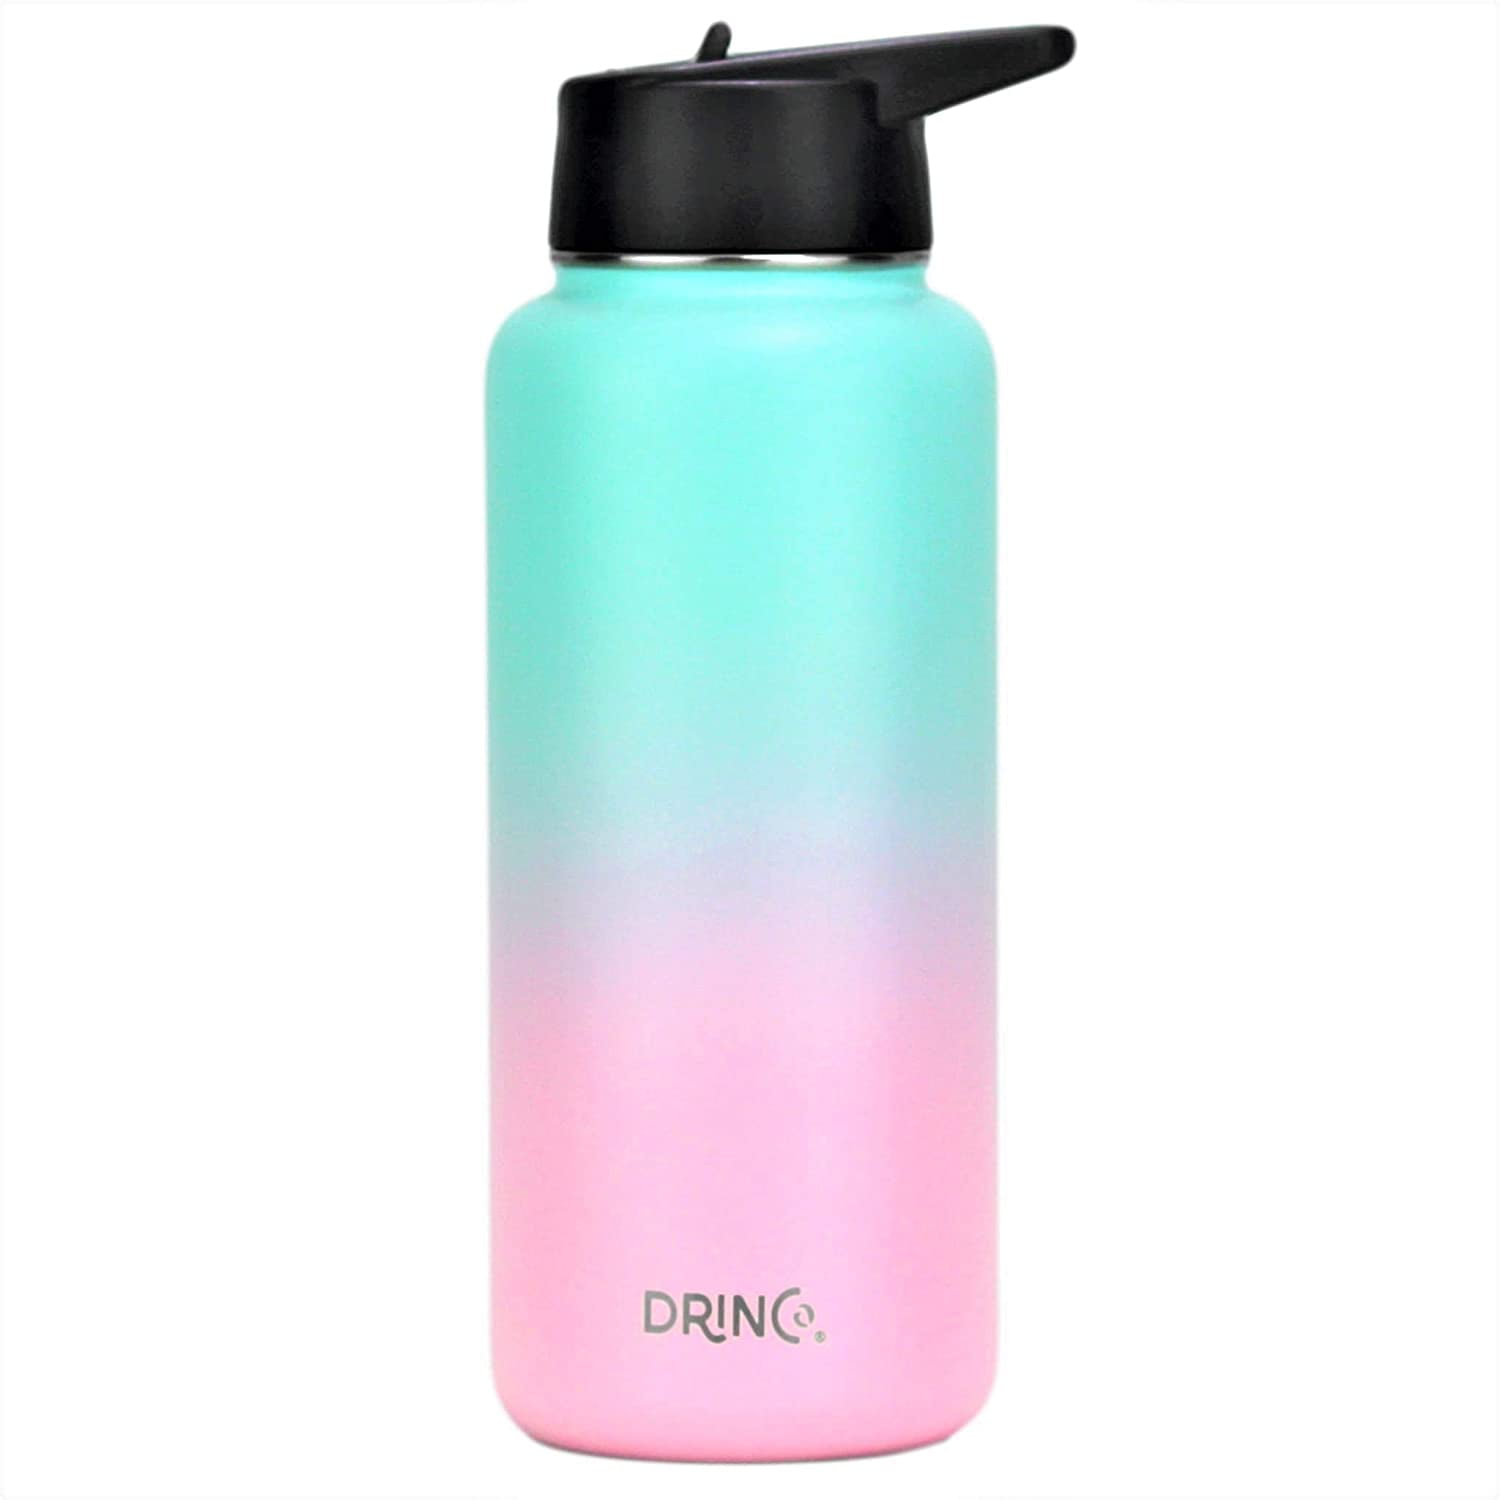  DRINCO Stainless Steel Water Bottle Spout Lid Vacuum Insulated  Double Wall Water Bottles Wide Mouth (40oz 32oz 22oz 18oz 14oz) Leak Proof  Keeps Cold or Hot (40 oz, 40oz Black) 